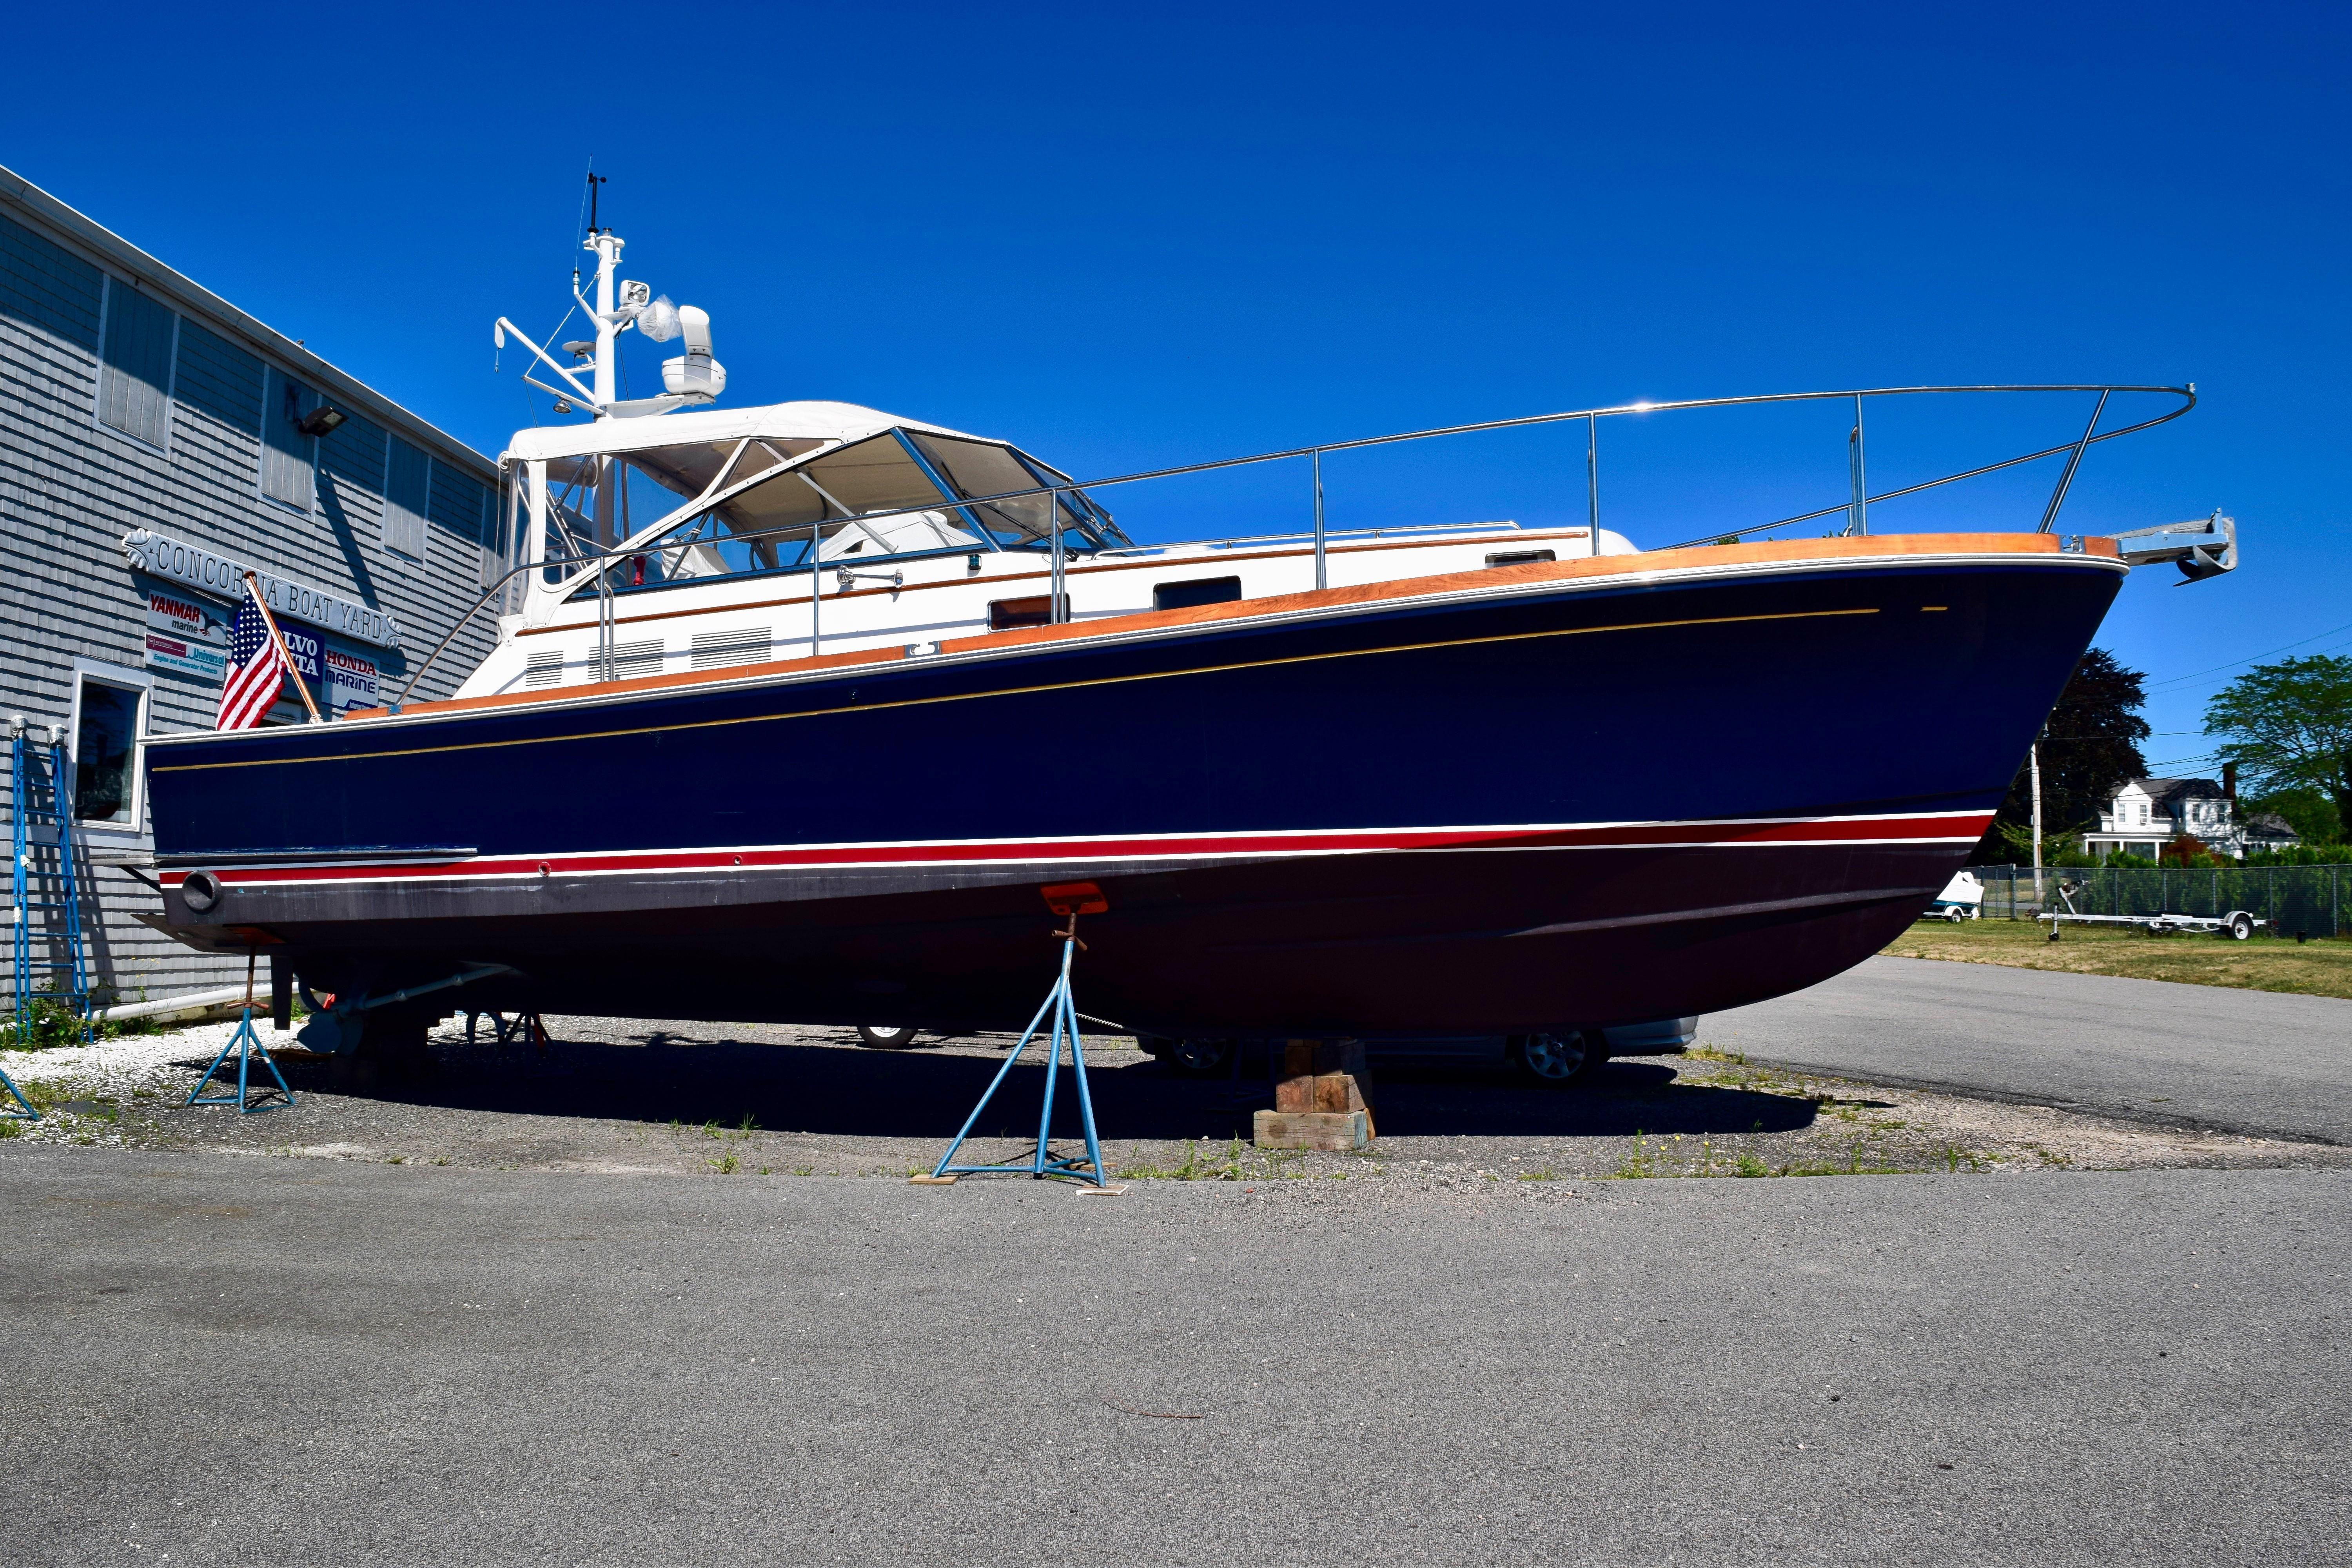 38 eastbay yacht for sale